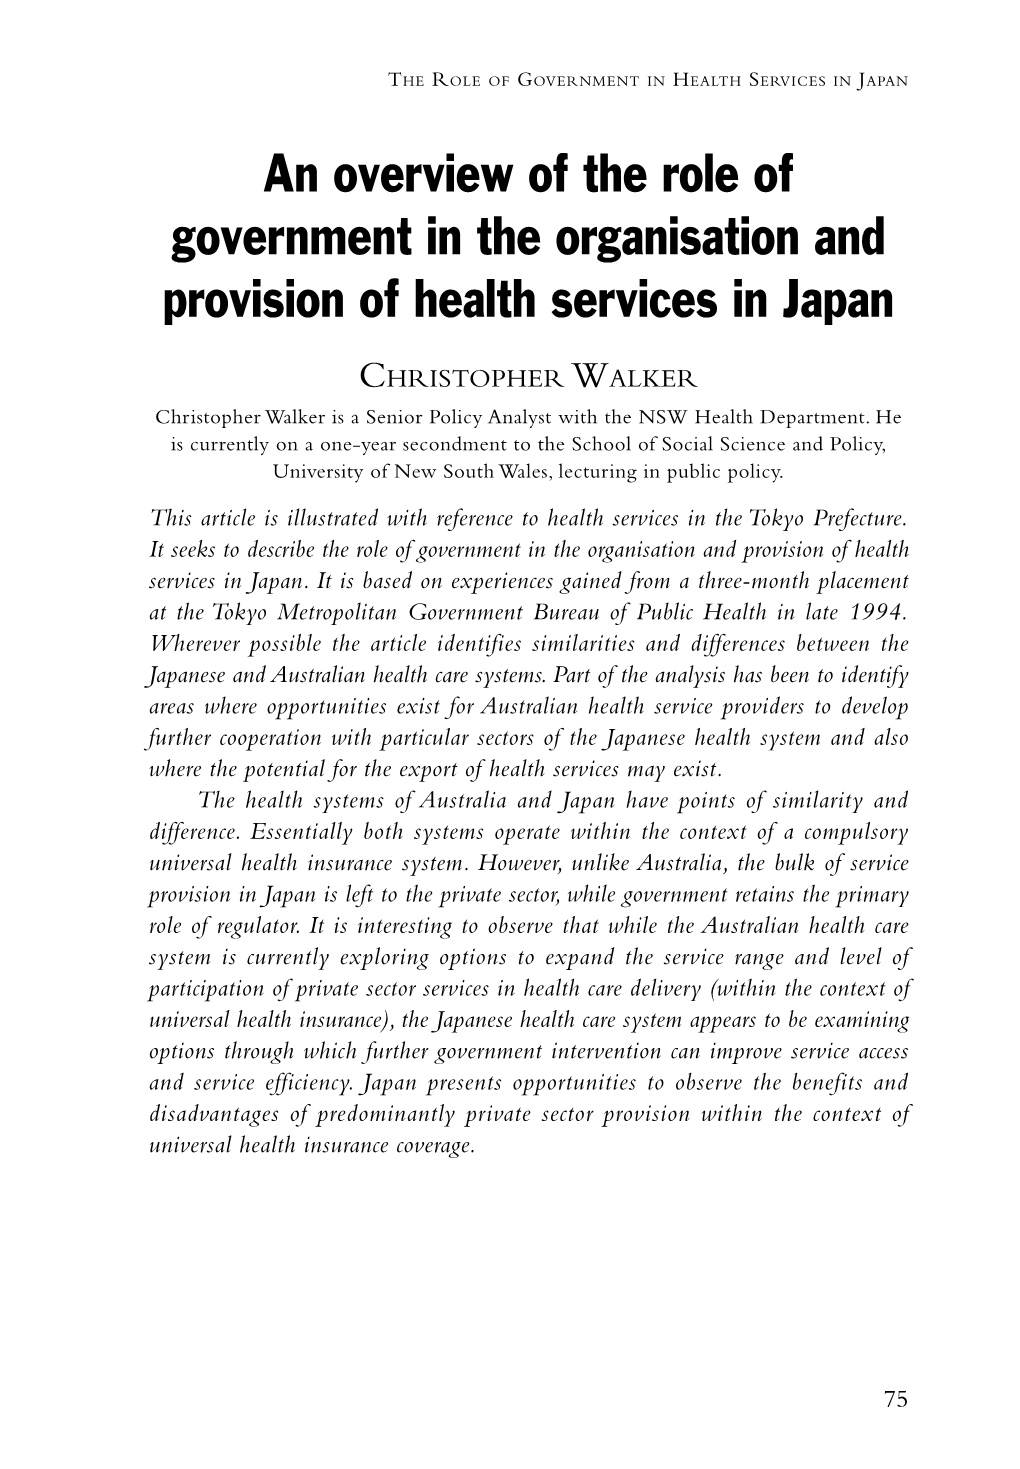 An Overview of the Role of Government in the Organisation and Provision of Health Services in Japan